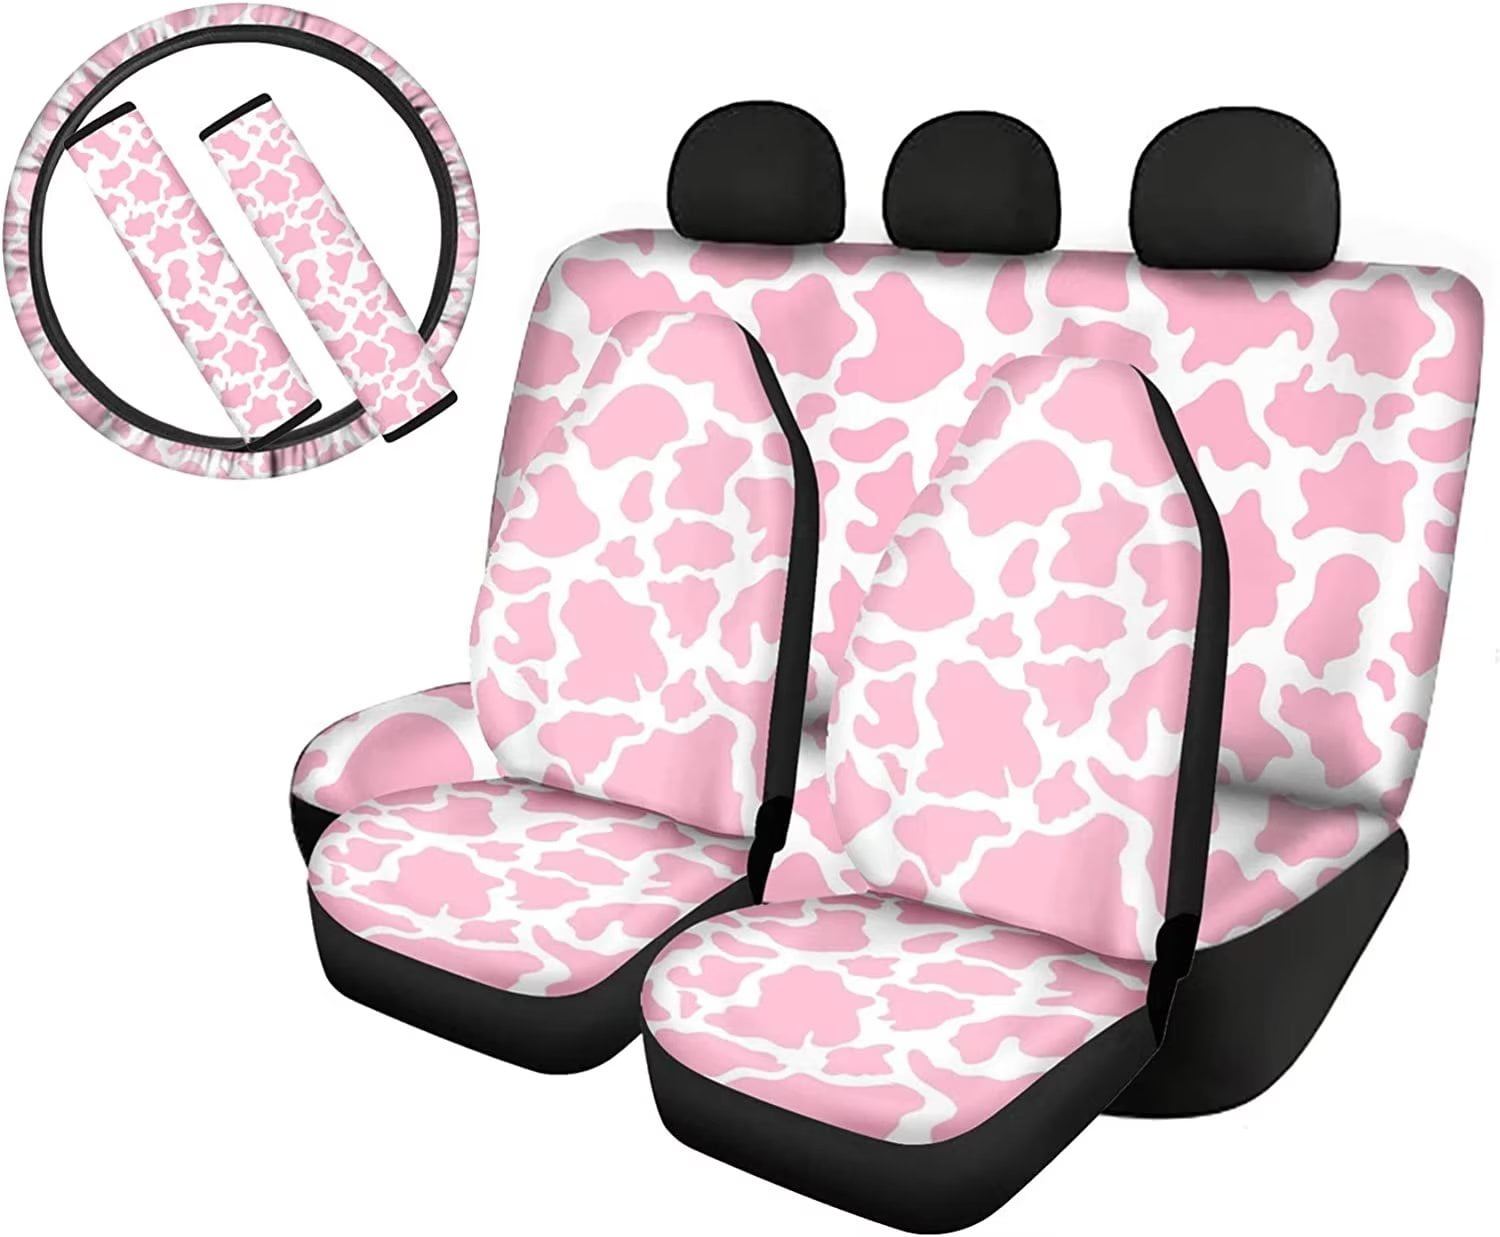 2pcs/set Butterfly Pattern Printed Elastic Car Seat Covers